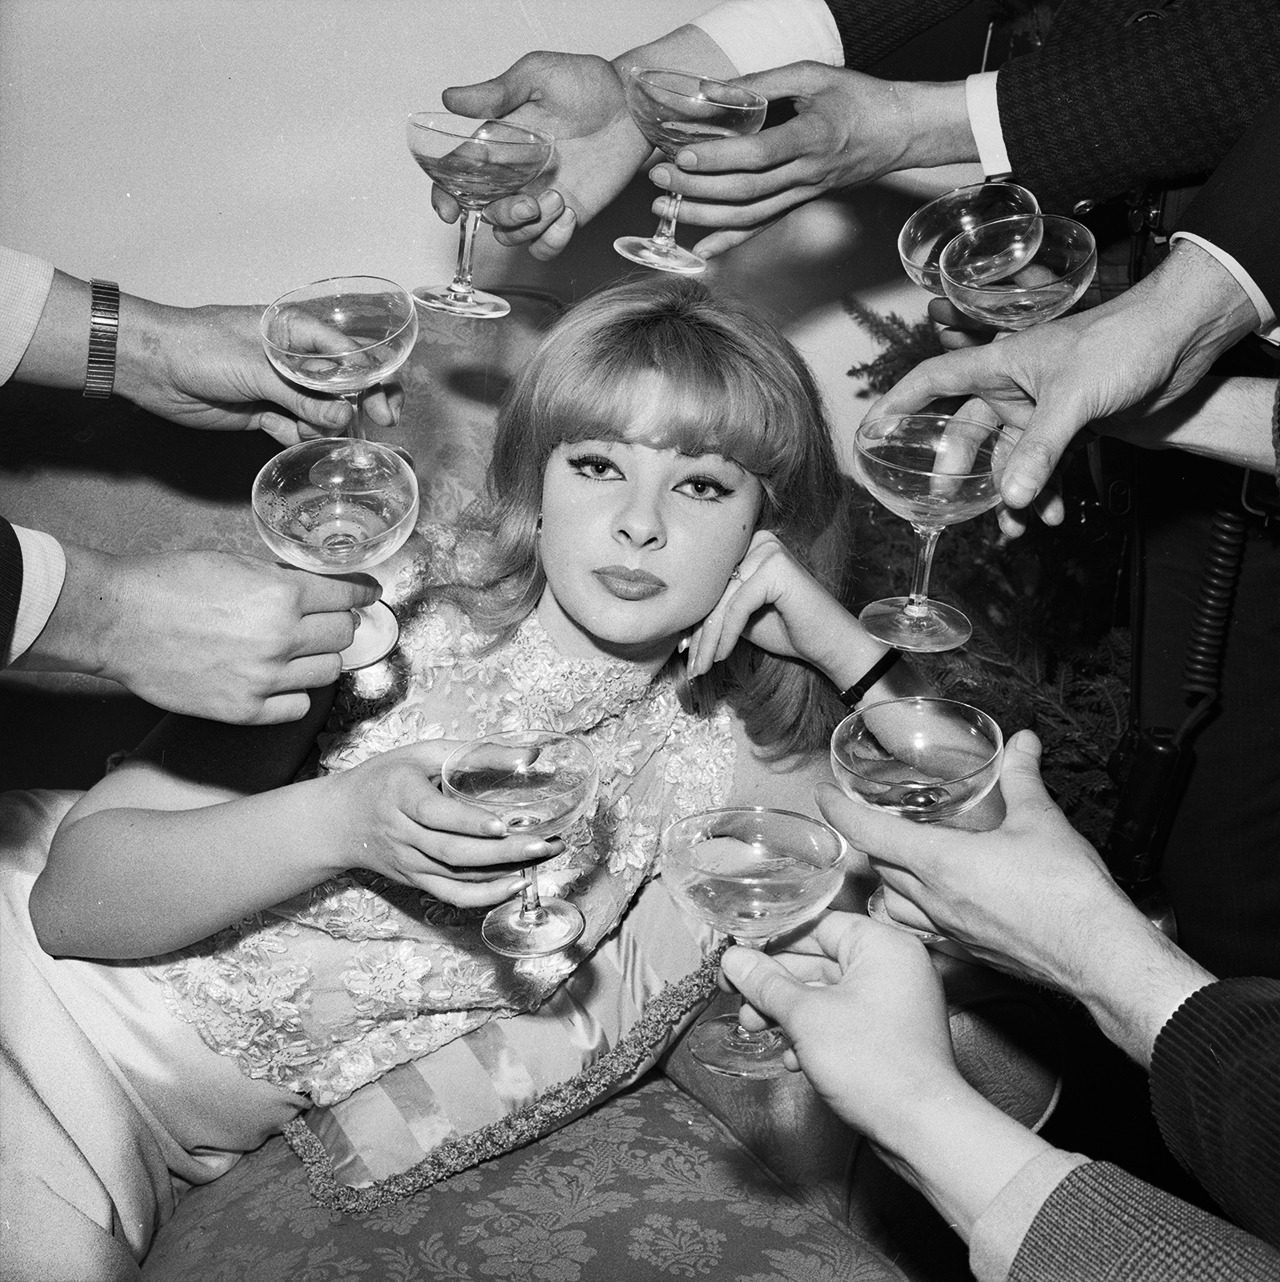 Mandy Rice-Davies, a Welsh showgirl and witness in the Profumo affair